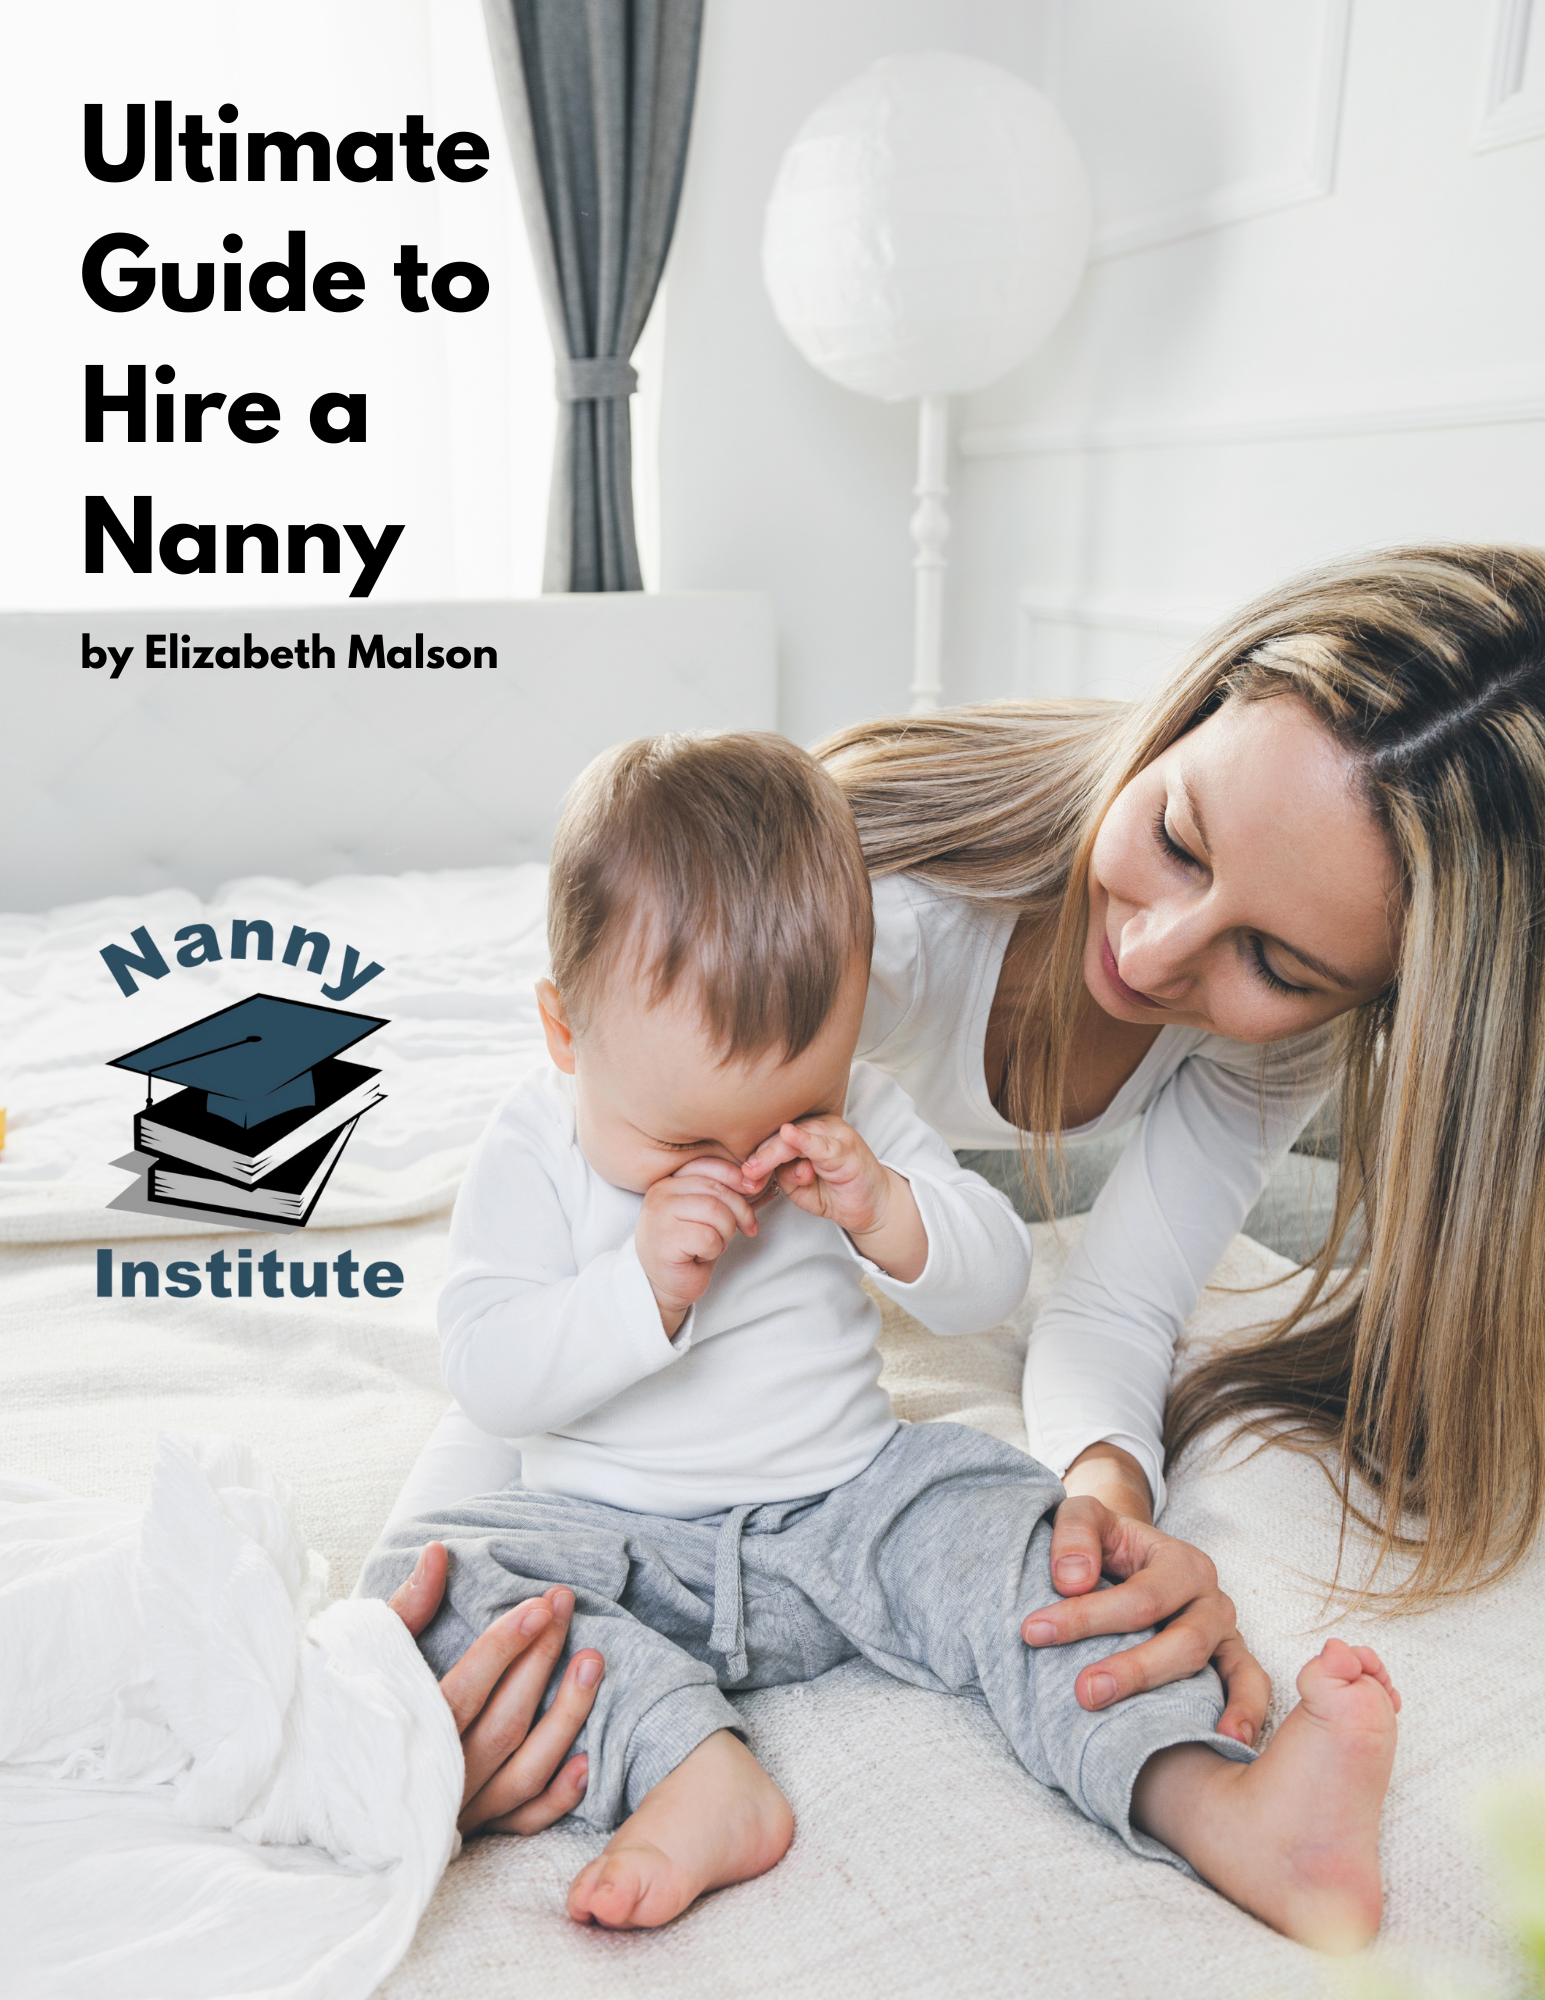 Ultimate Guide to Hire and Manage a Nanny